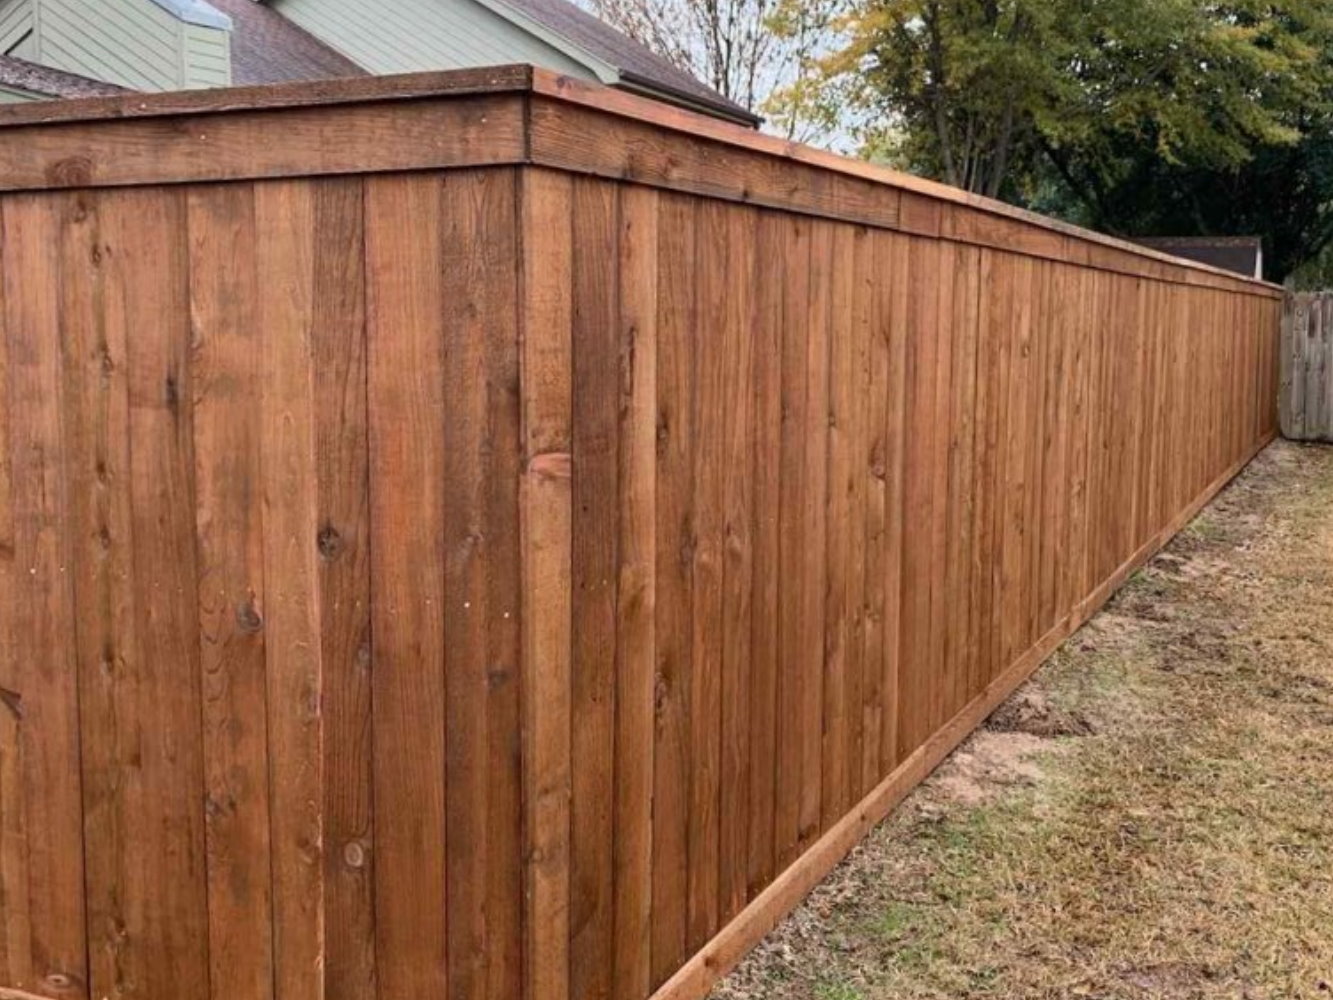 New Boston TX cap and trim style wood fence